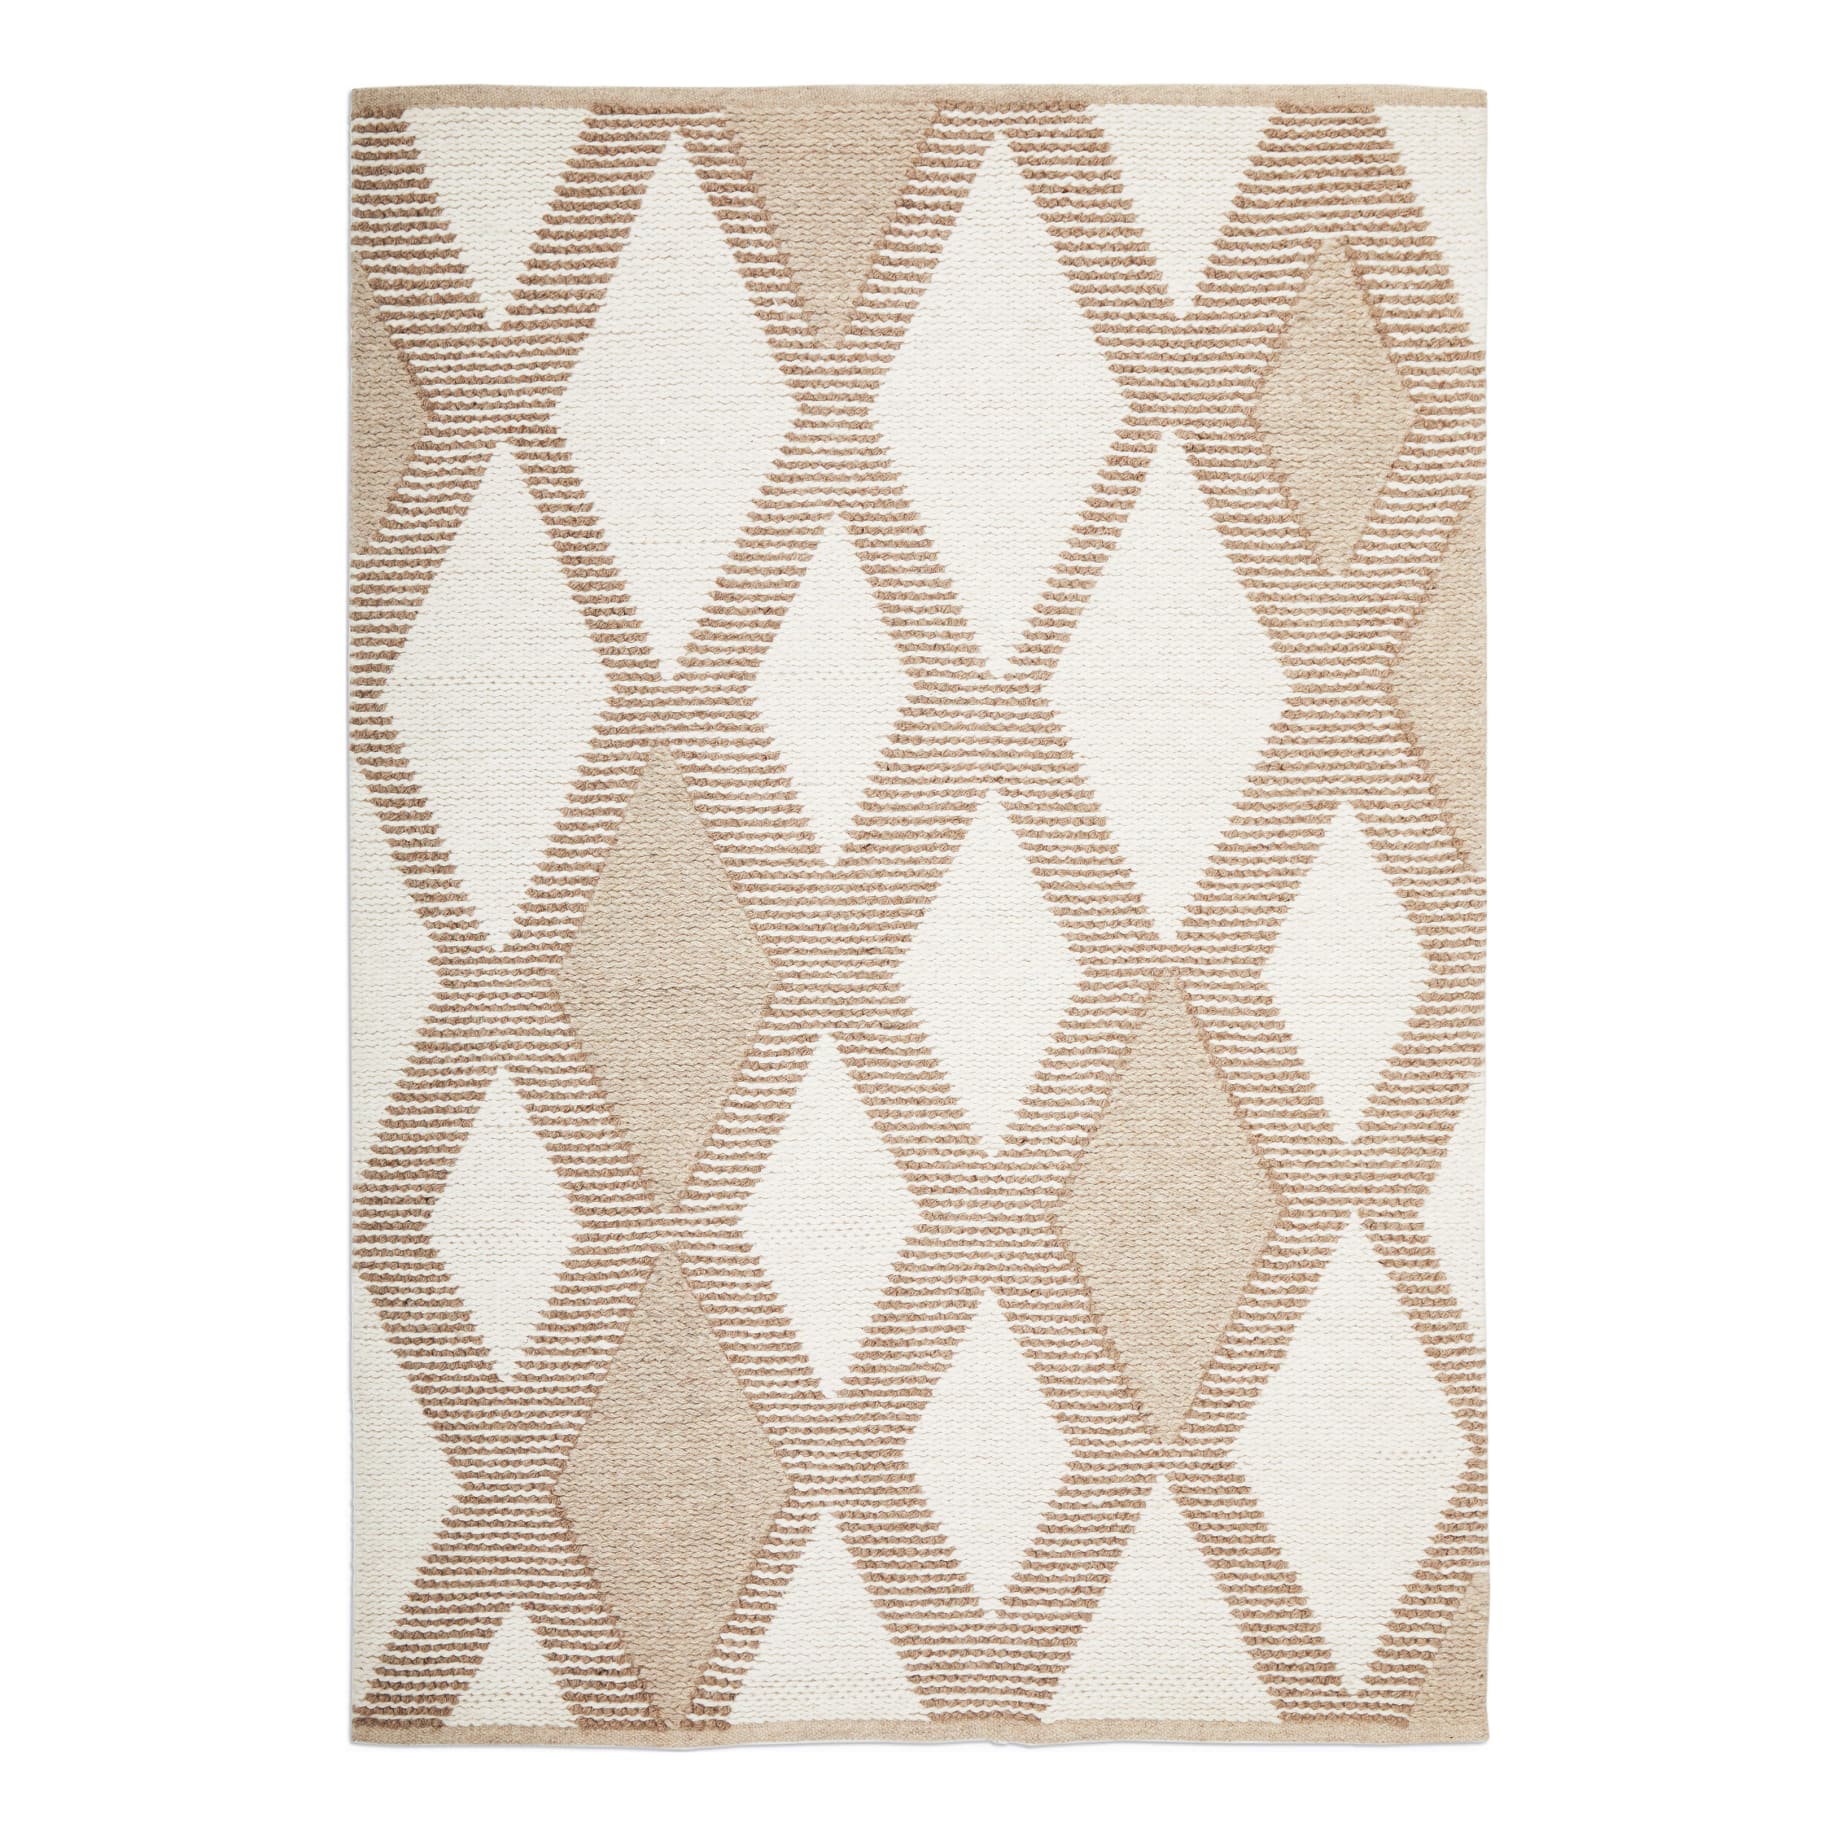 Avalon Shelly Rug 155x225cm in Natural